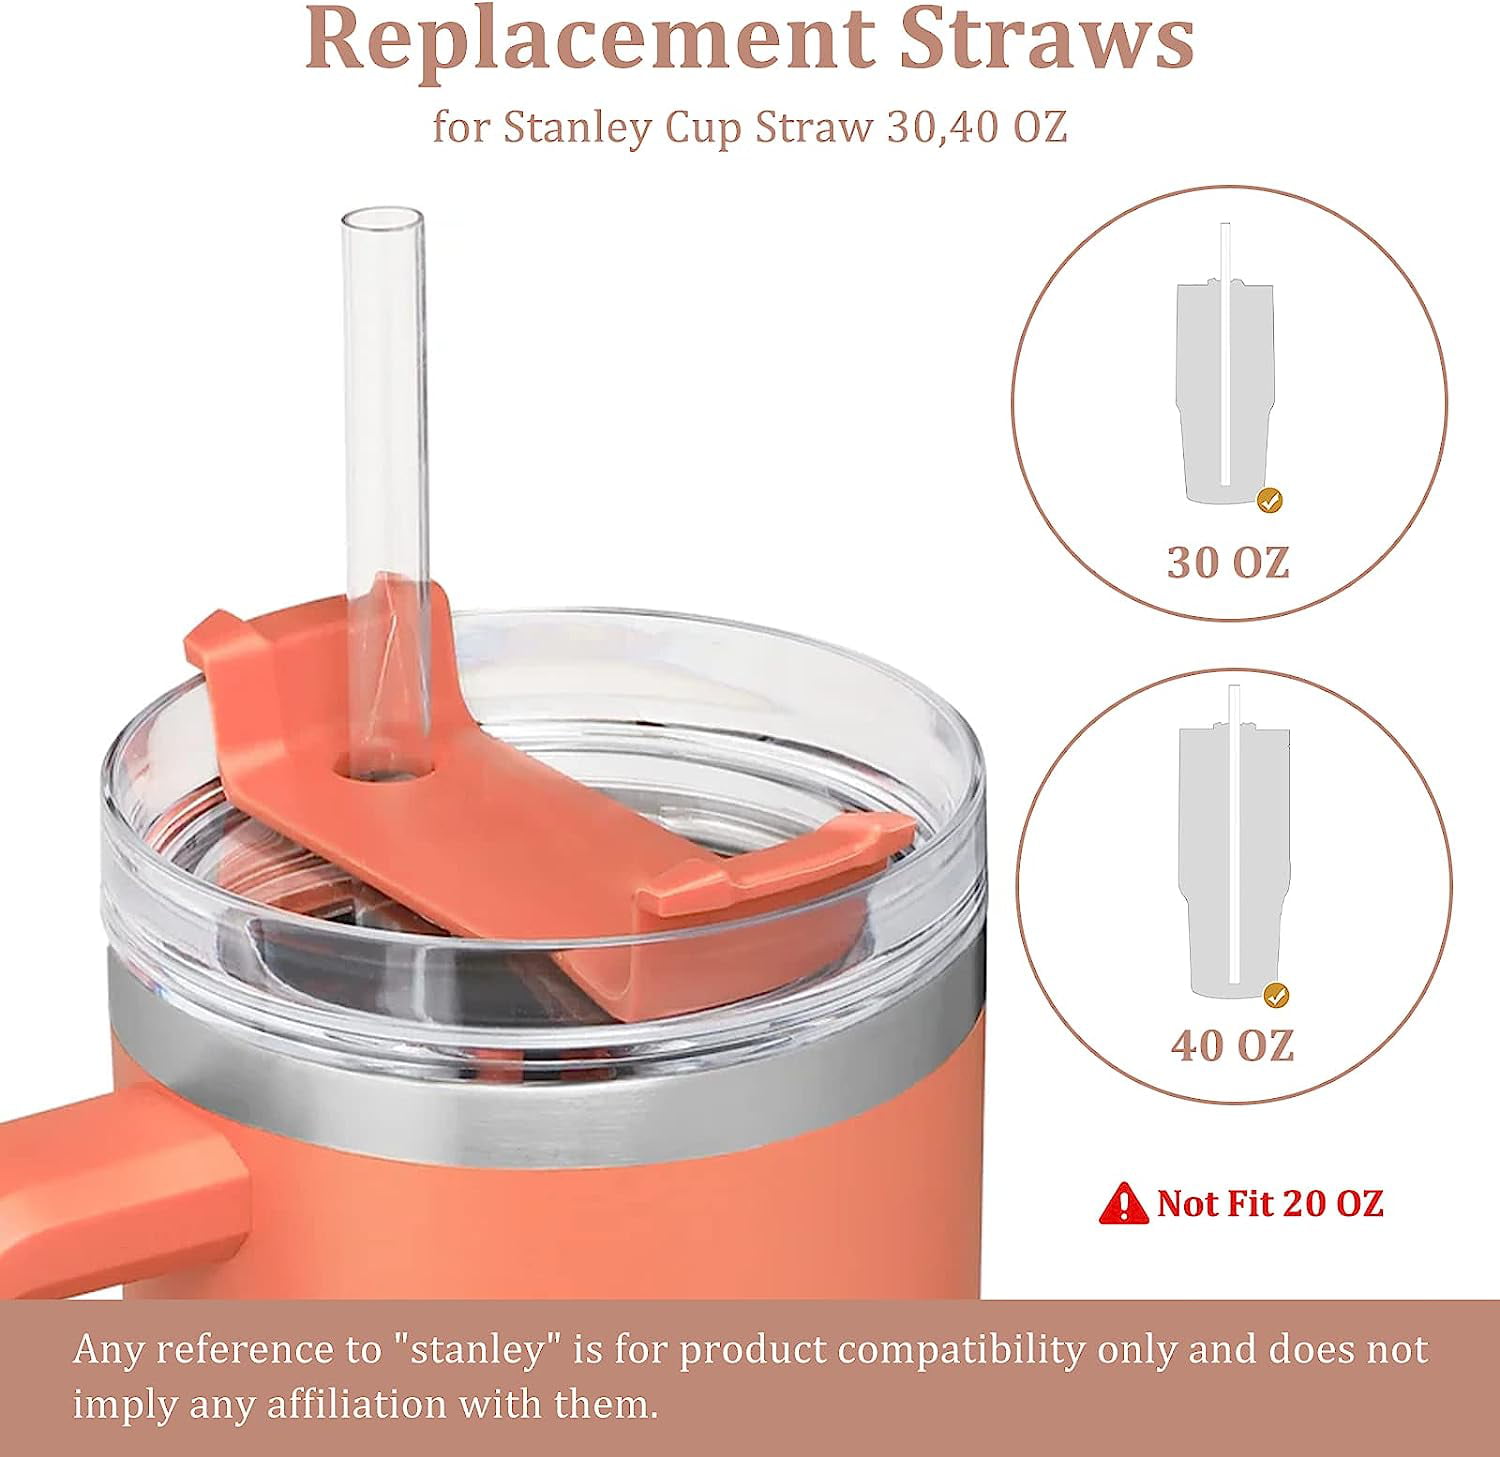 Trianu 6 Pack Replacement Straw for Stanley 40 oz 30 oz 20 oz Cup Tumbler, Reusable Straws for Stanley Adventure Quencher Tumbler with Handle, Plastic